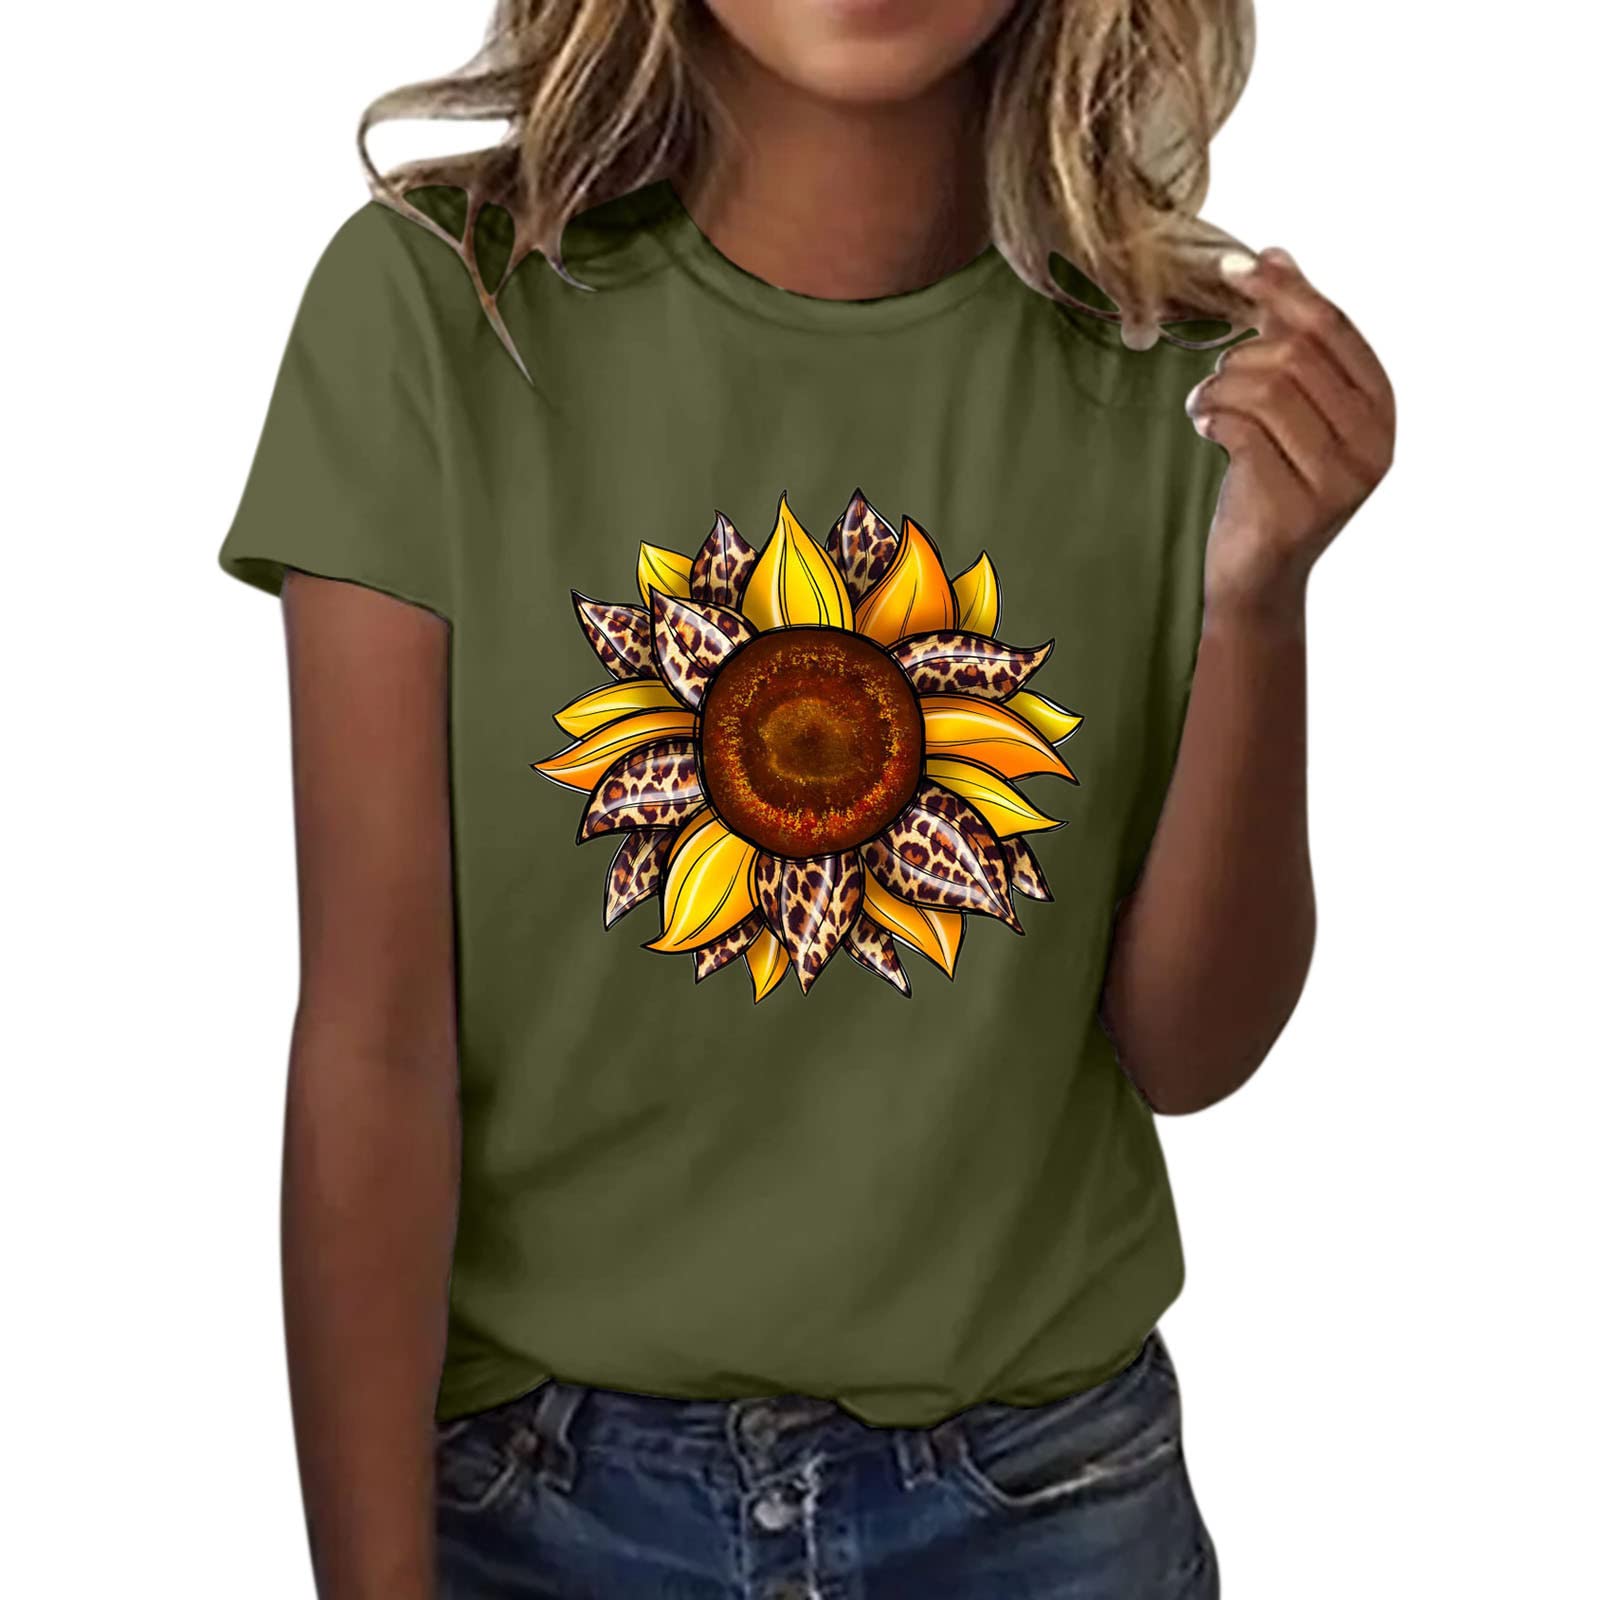 Sunflower Tank Top Sunflower Tank Tops for Women Plus Size Clothing  Available Womens Summer Tops Womens Summer Clothing Sun Flower 